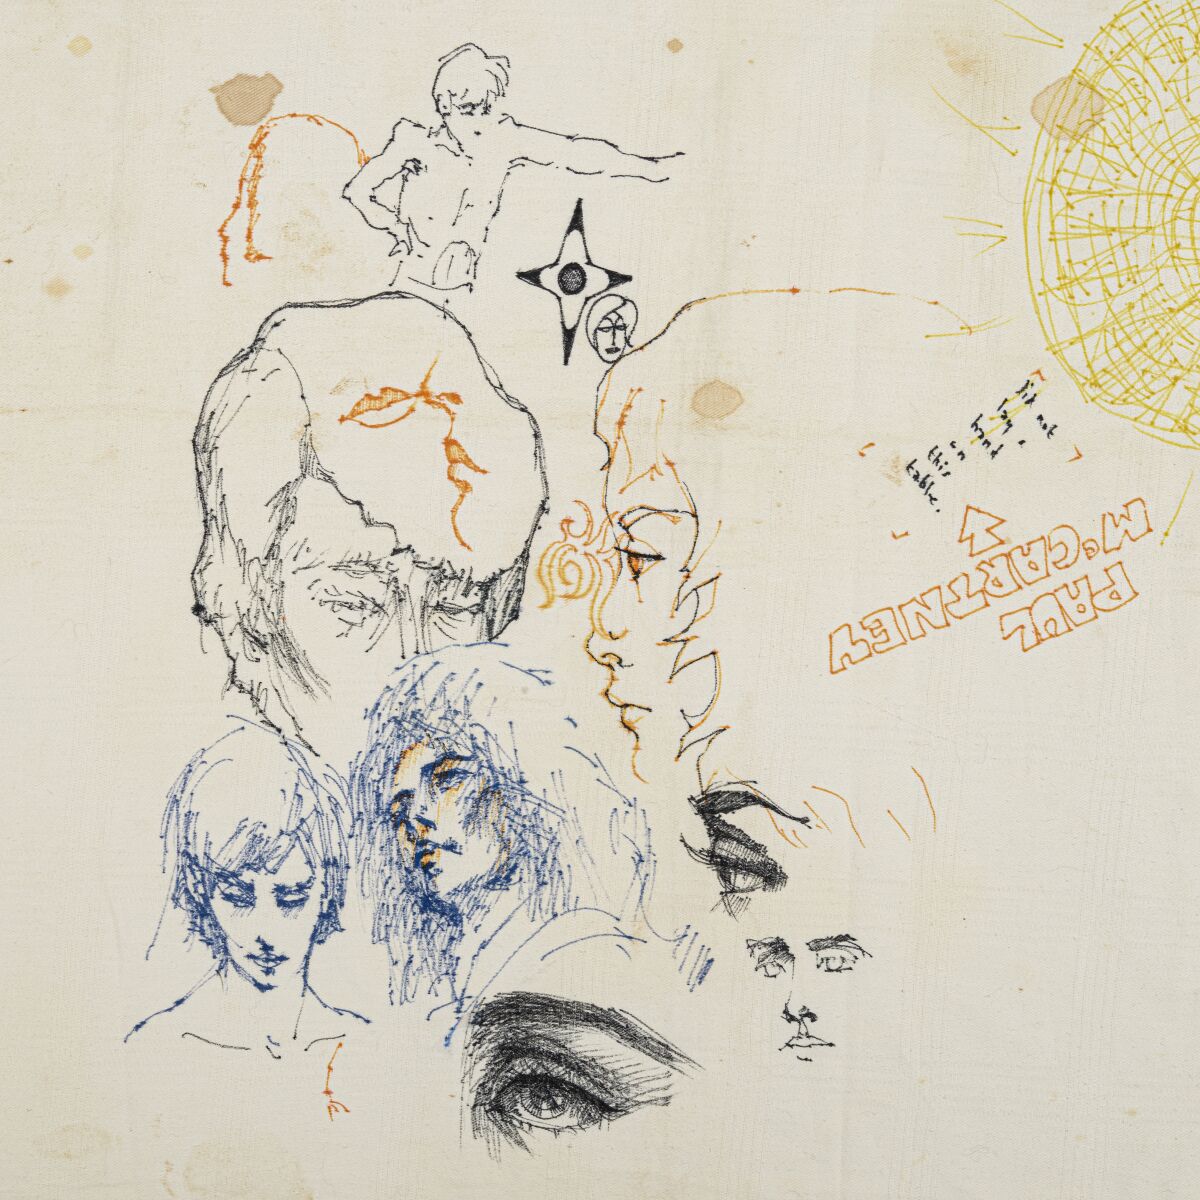 A close-up of a tablecloth with signatures and drawings of The Beatles from 1966.